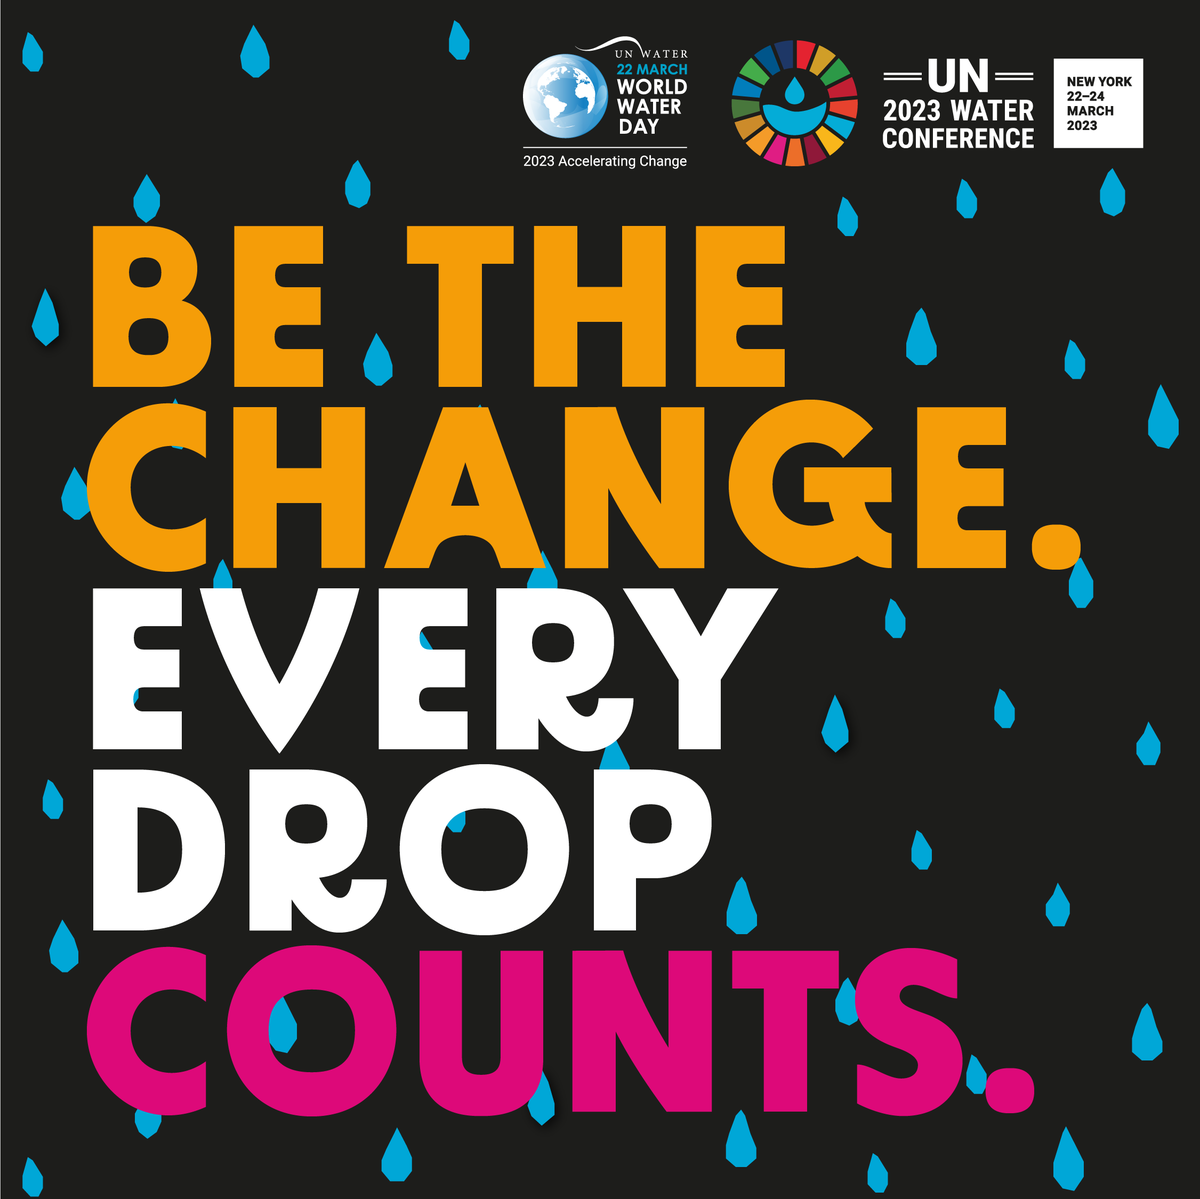 Did you know that poor water, sanitation, and hygiene cause 1.4 million deaths annually and shorten 74 million lives? Change the way you use, consume, and manage water in your daily life and make a commitment: unwater.org/bethechange/ #WorldWaterDay #WaterActionAgenda #BeTheChange